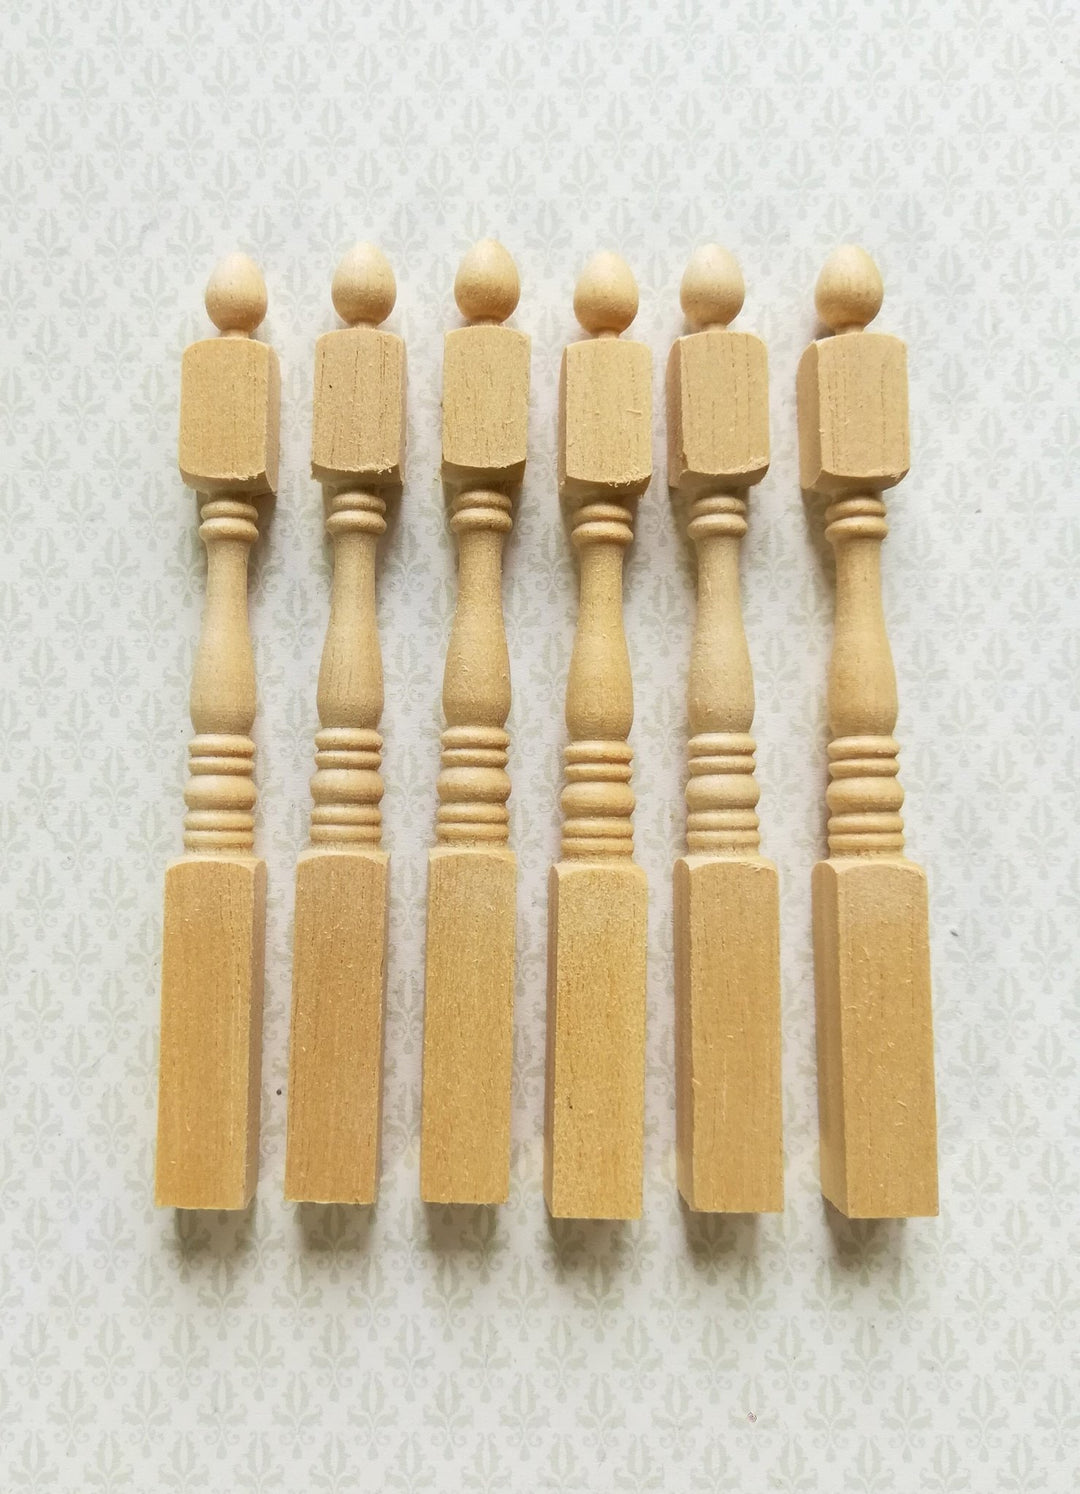 Dollhouse Miniature Spindles Newel Posts Wood 6 Pieces 1:12 Scale 3 1/2" Long - Miniature Crush